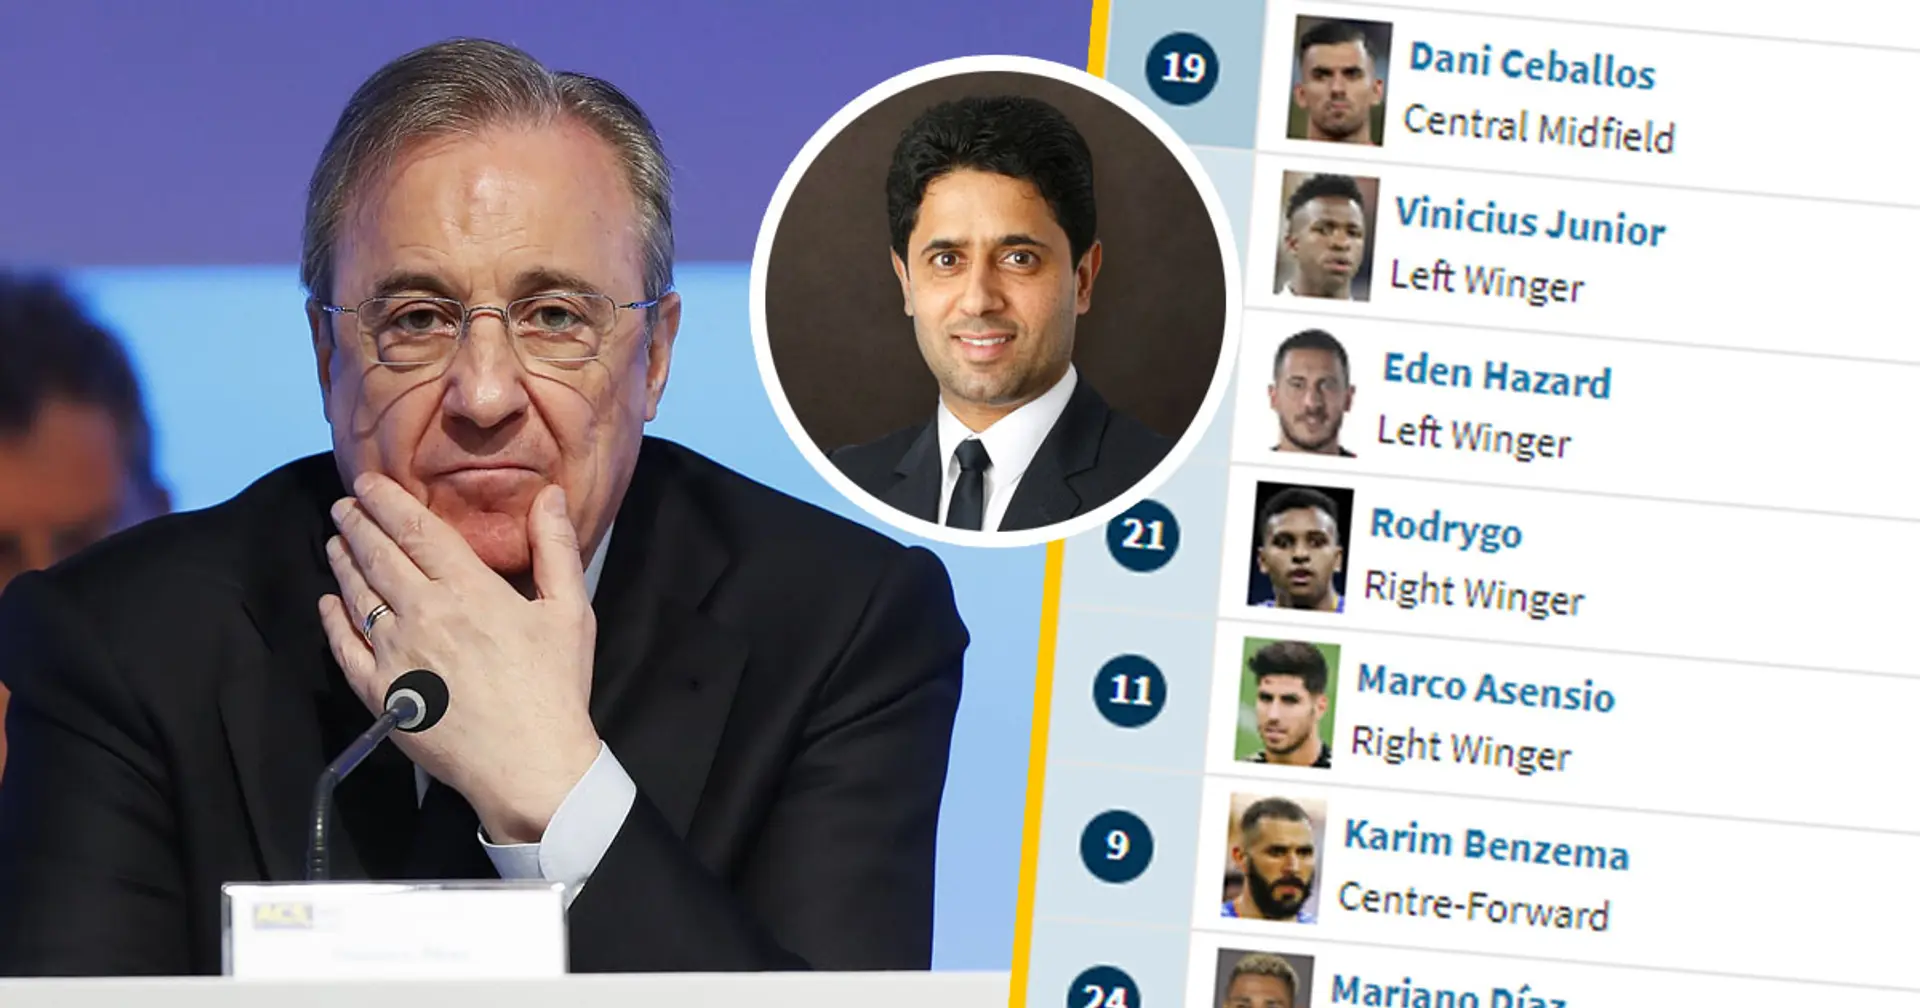 PSG approached Real Madrid over one player on deadline day, club didn't even listen to offer (reliability: 5 stars)